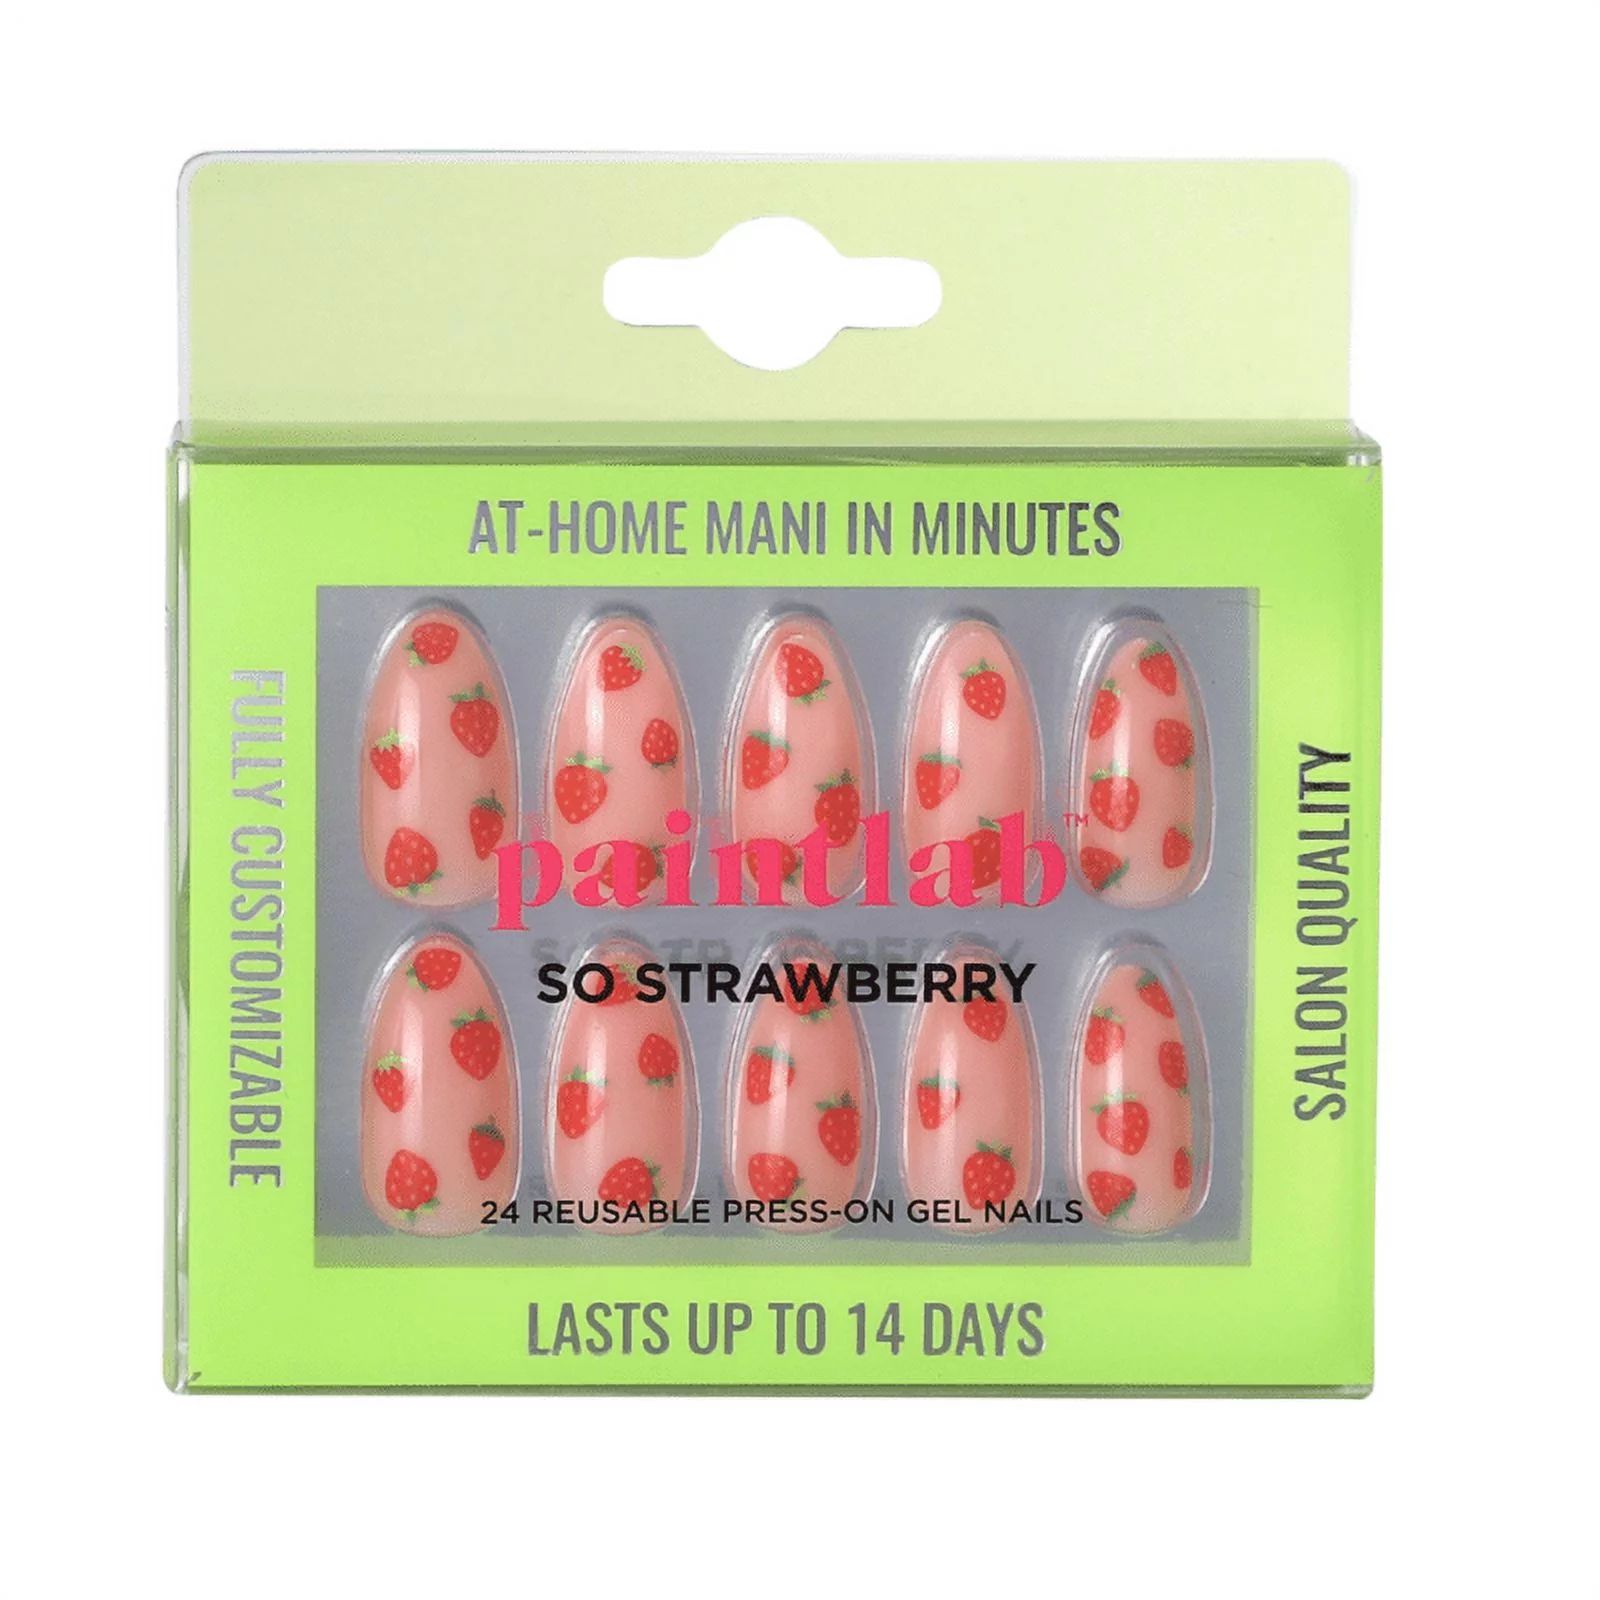 PaintLab Reusable Press-on Gel Nails Kit, Almond Shape, So Strawberry Pink, 30 Count | Walmart (US)